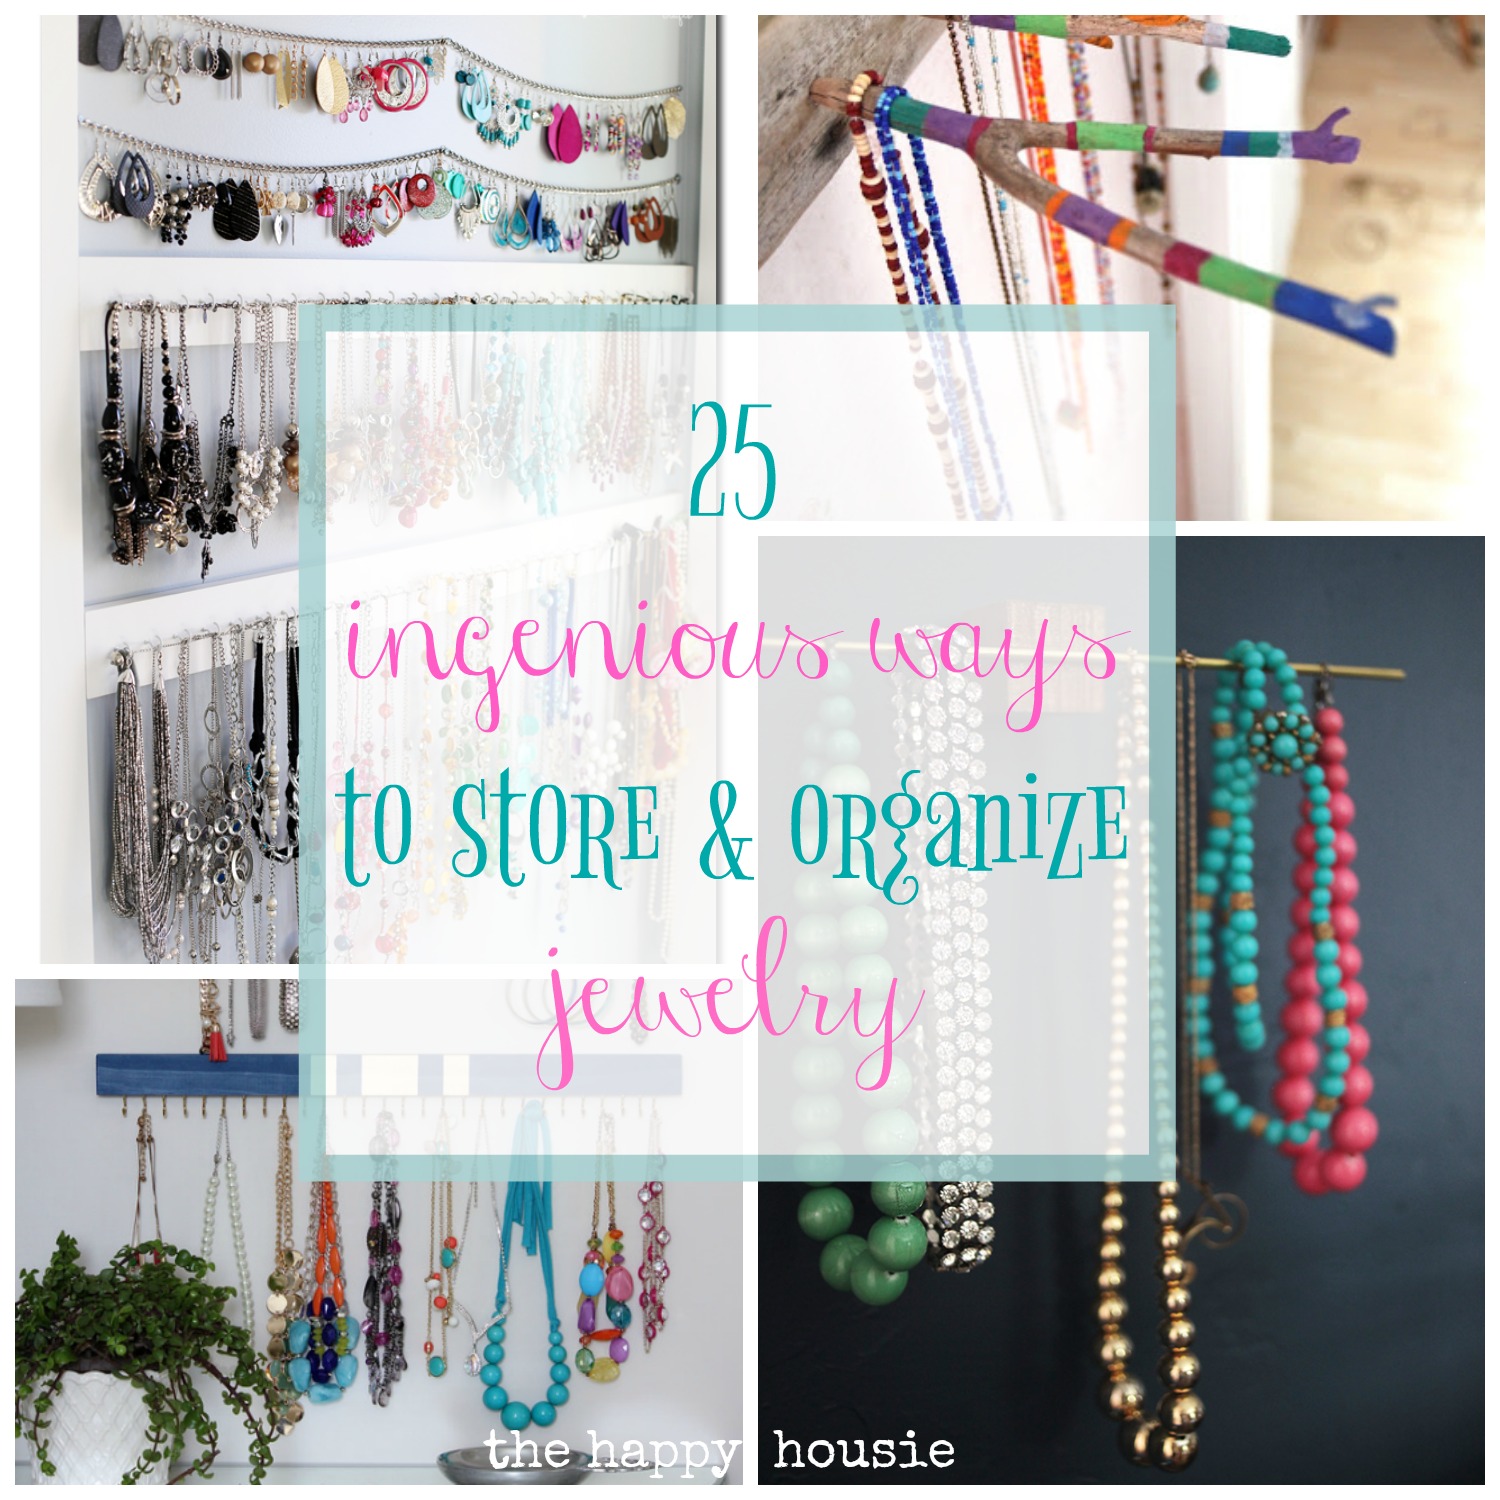 6 Beautiful Ways to Store & Display Your Jewelry - spaceWise Organizing and  Coaching